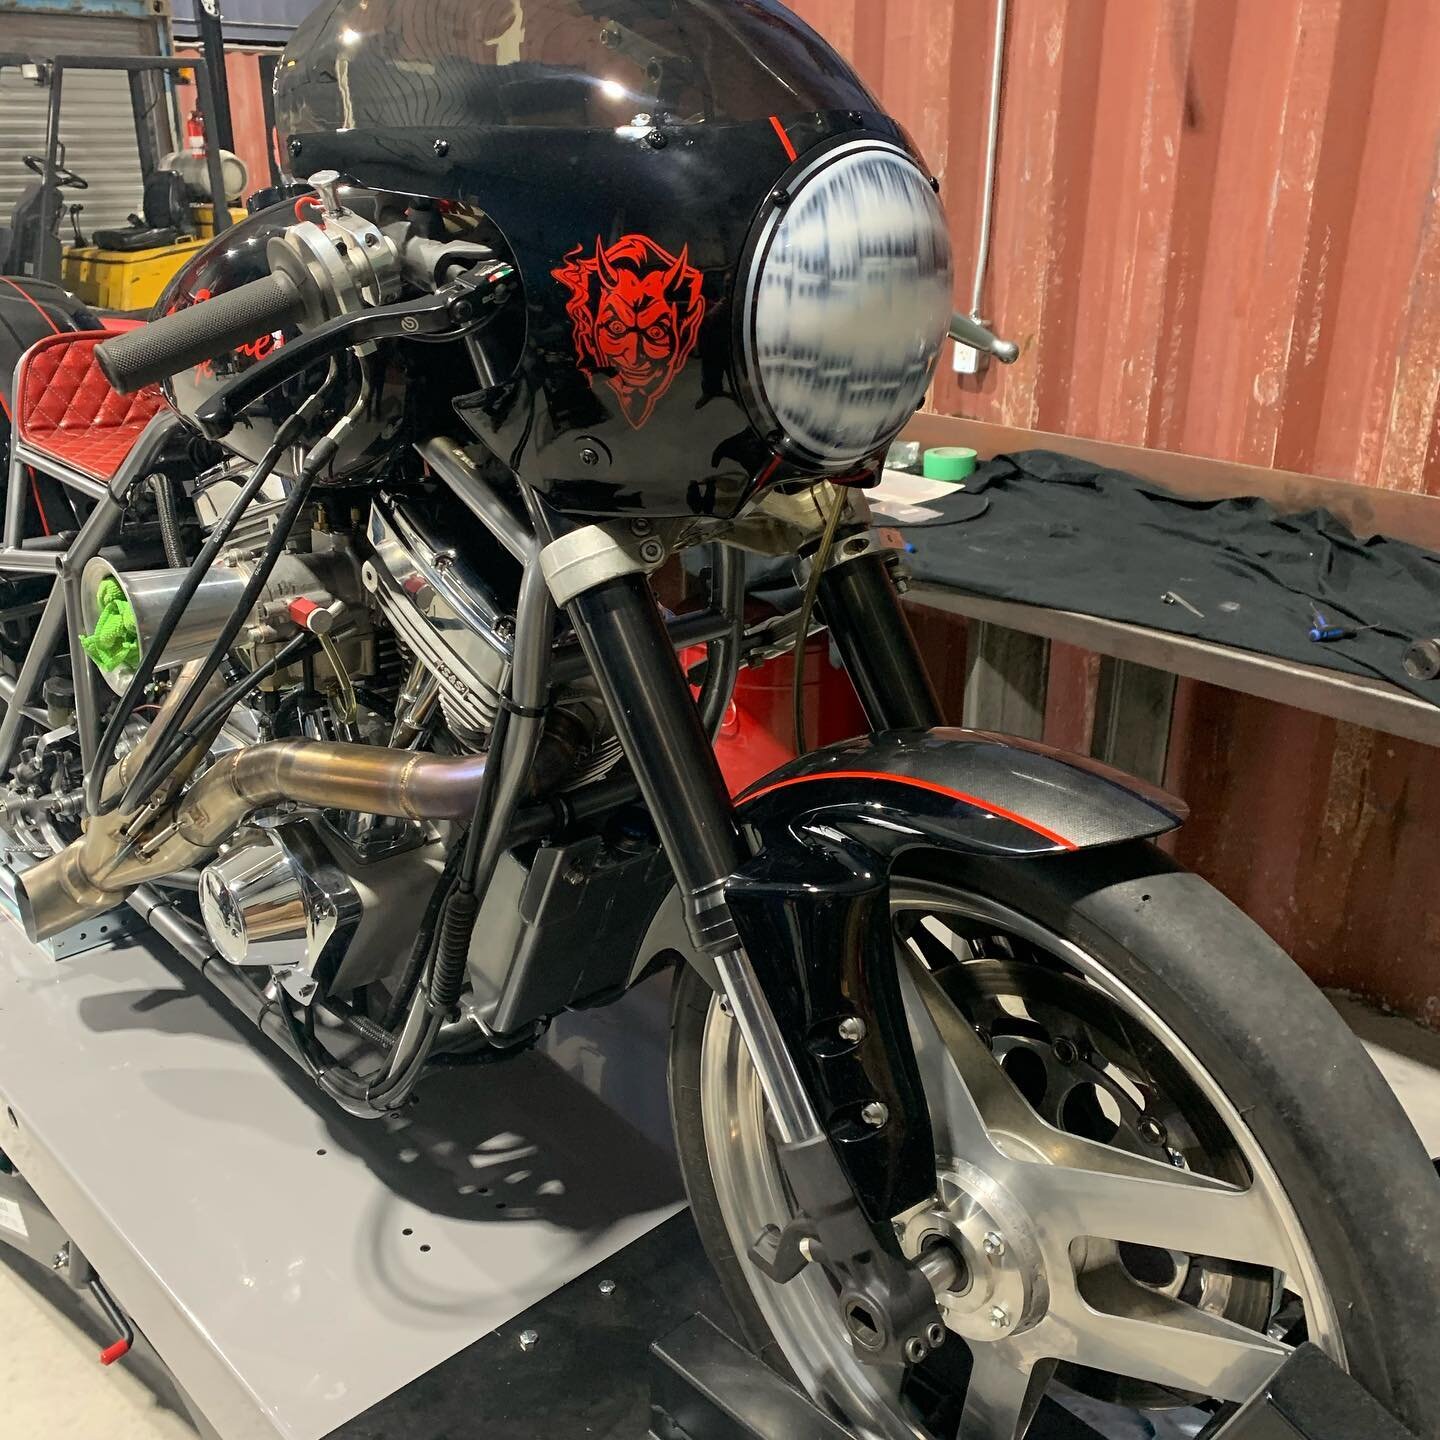 Drag Bike is now ready for testing with new Paint, upgraded frame and paint, new motor swap#S&amp;S motors#blackwidowcustompaint #bikedragracing #nhra